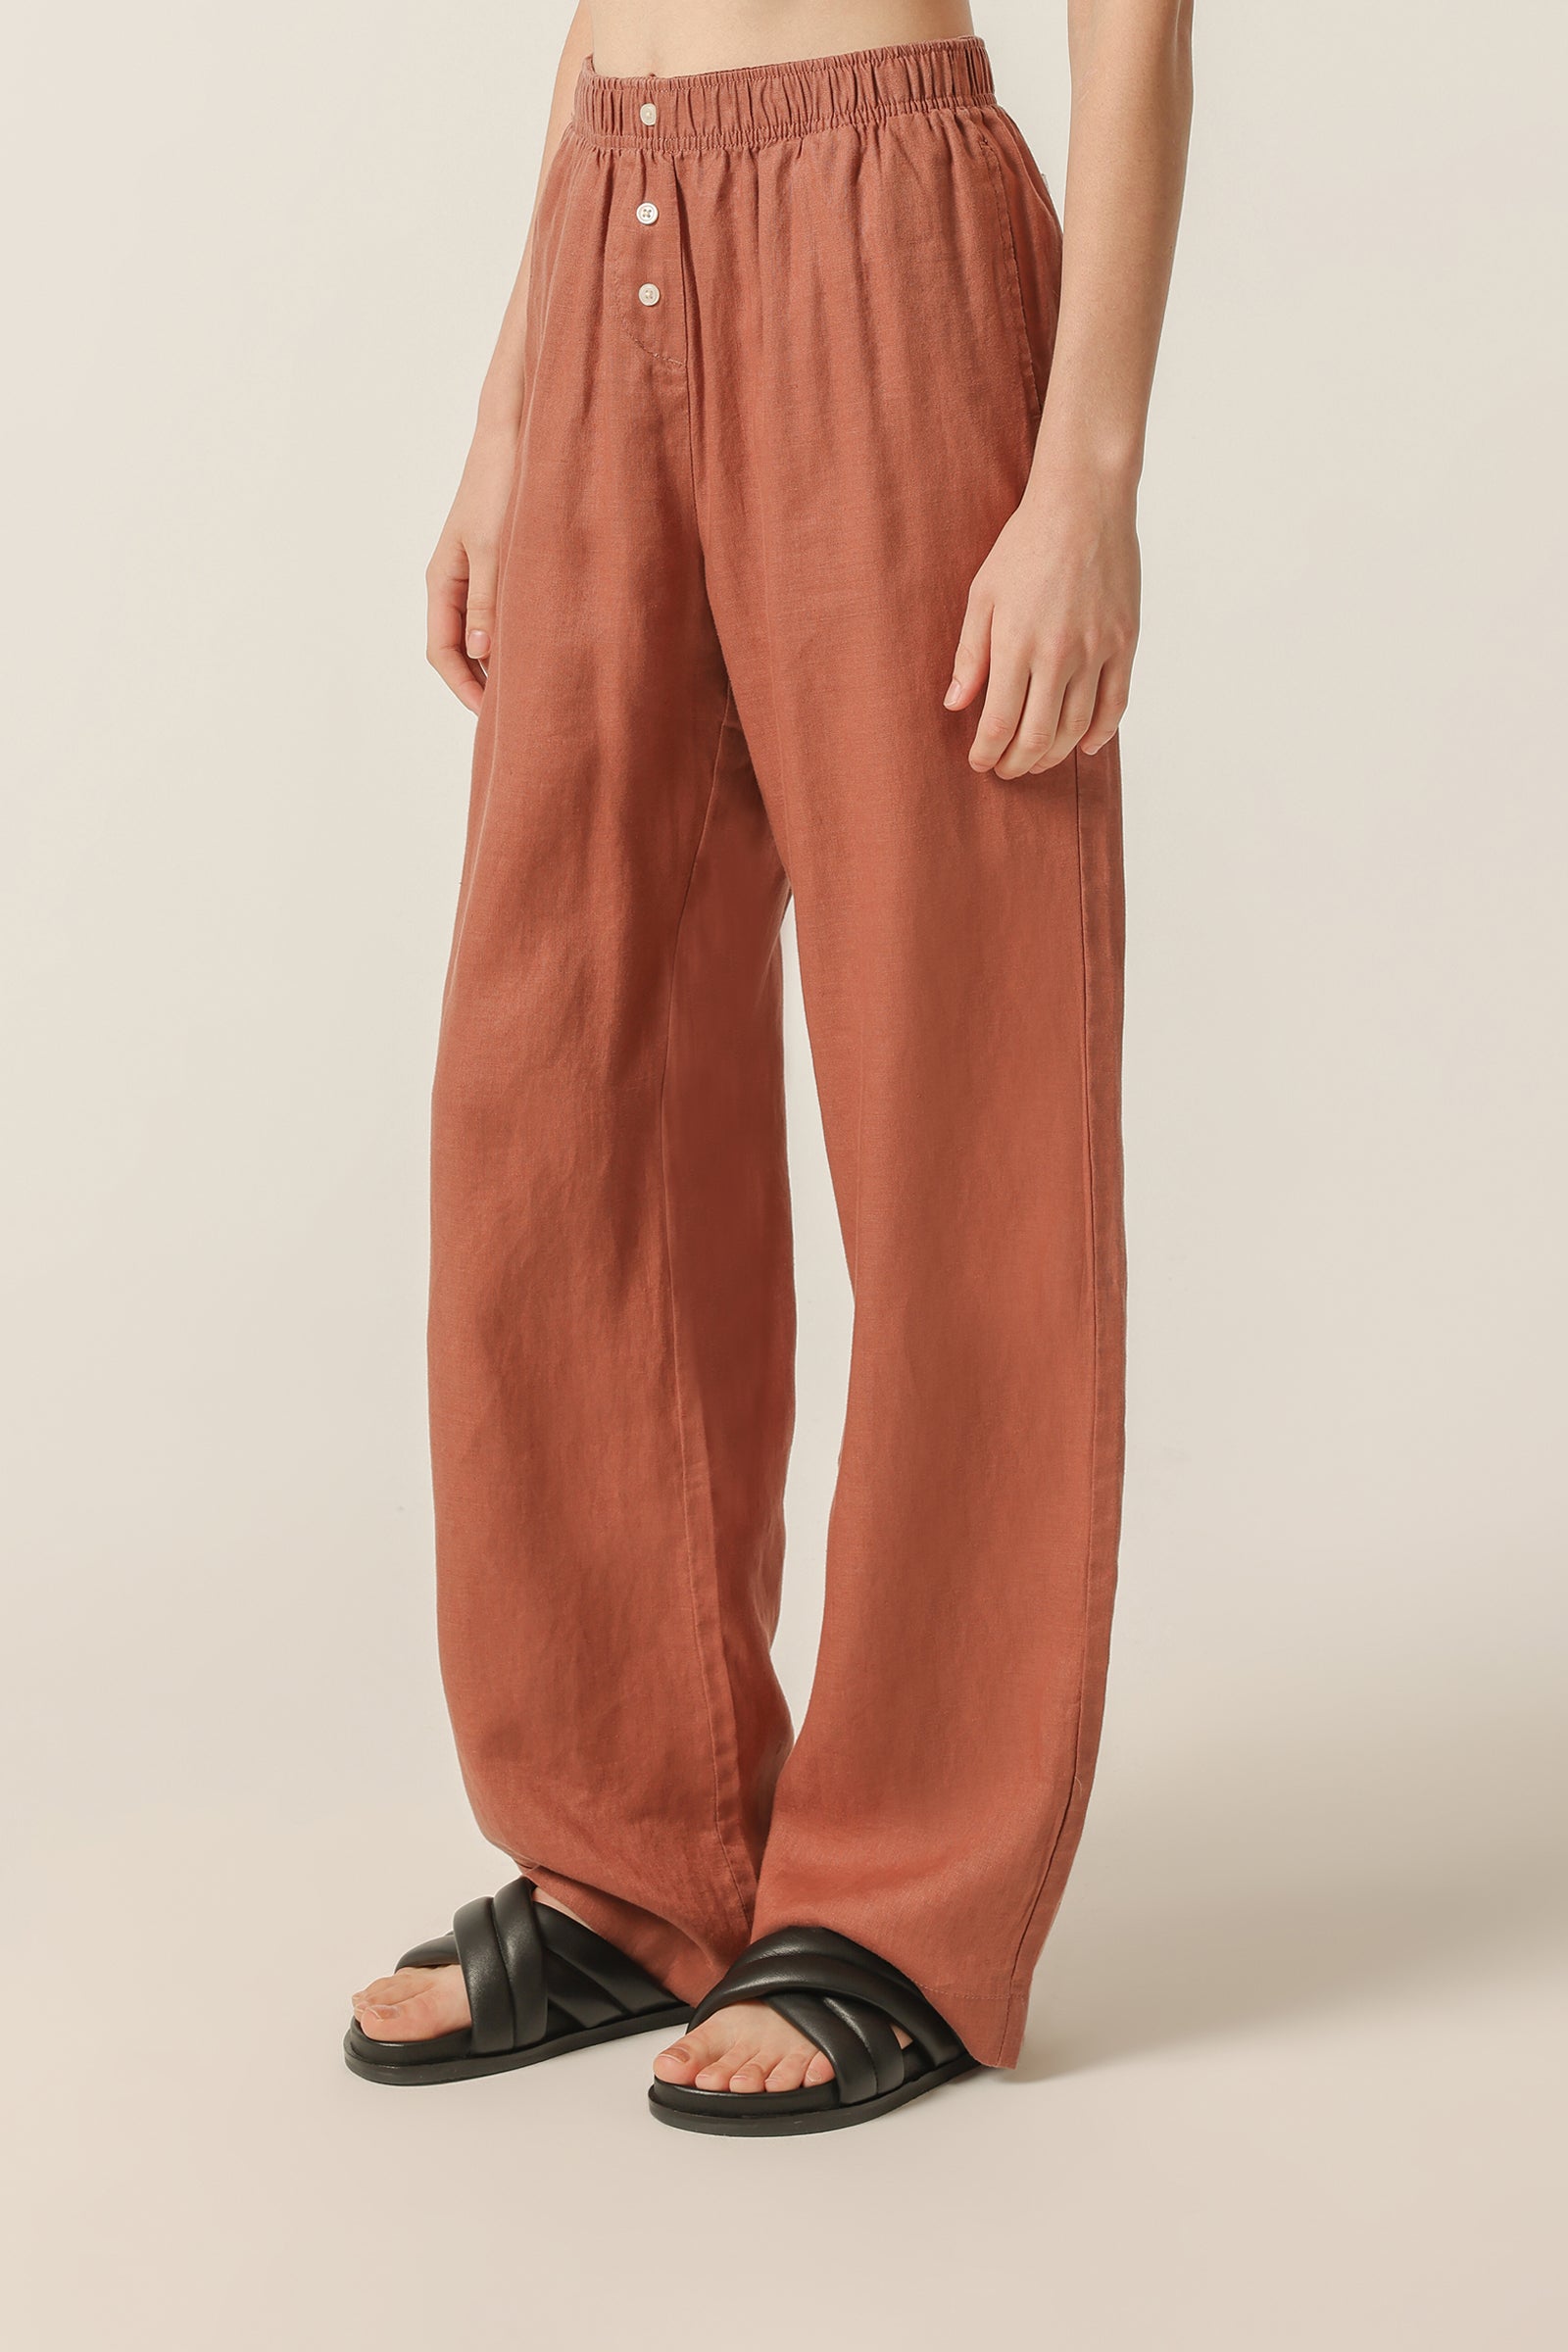 Nude Lucy Lounge Linen Pant in a Light Brown Brandy Colour